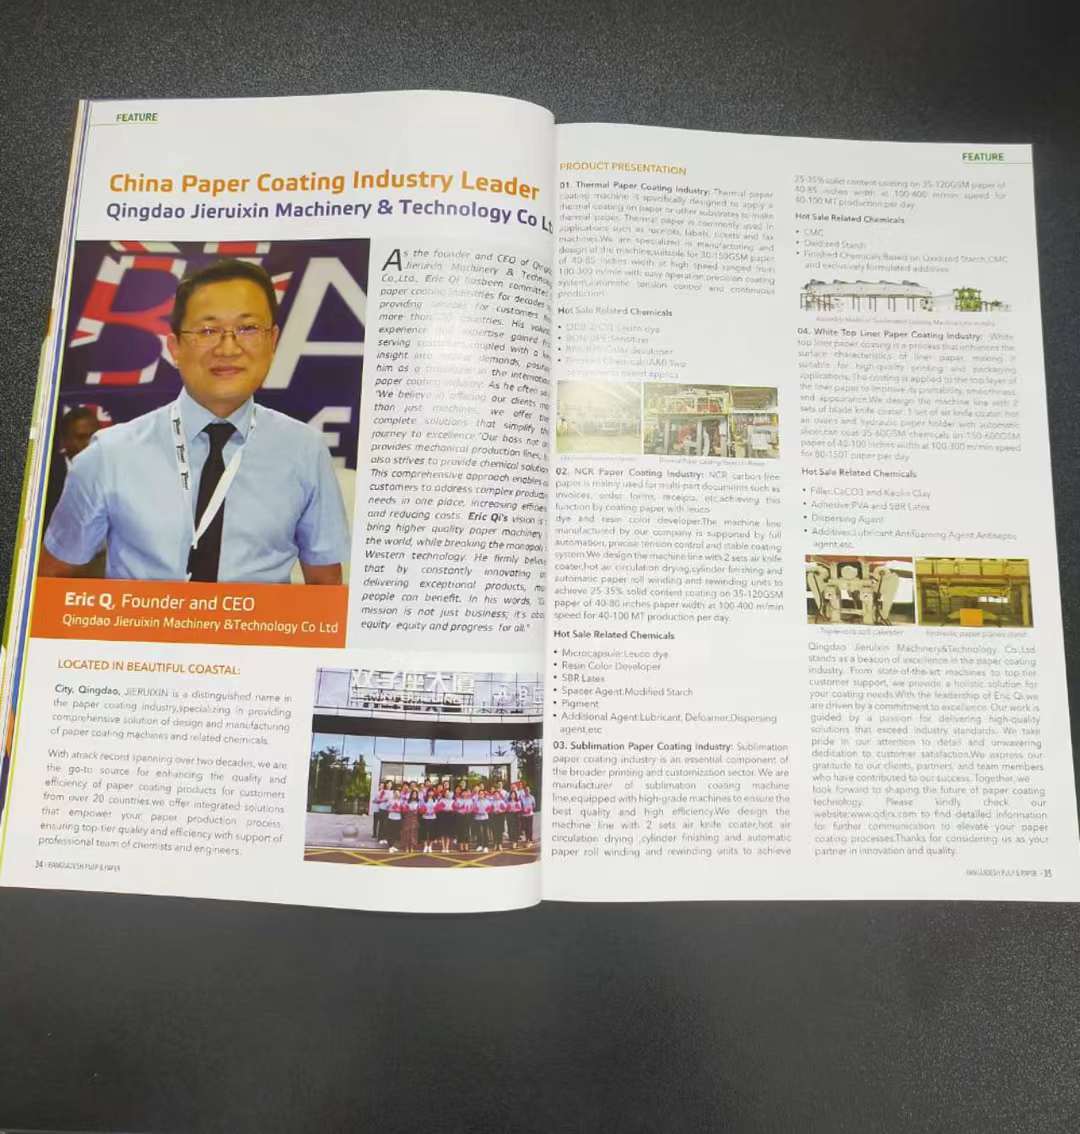 Qingdao Jieruixin Machinery & Technology Co., Ltd. Recognized in Prestigious Bangladeshi Paper Industry Publication, Showcasing Leadership in Chinese Paper Coating Sector